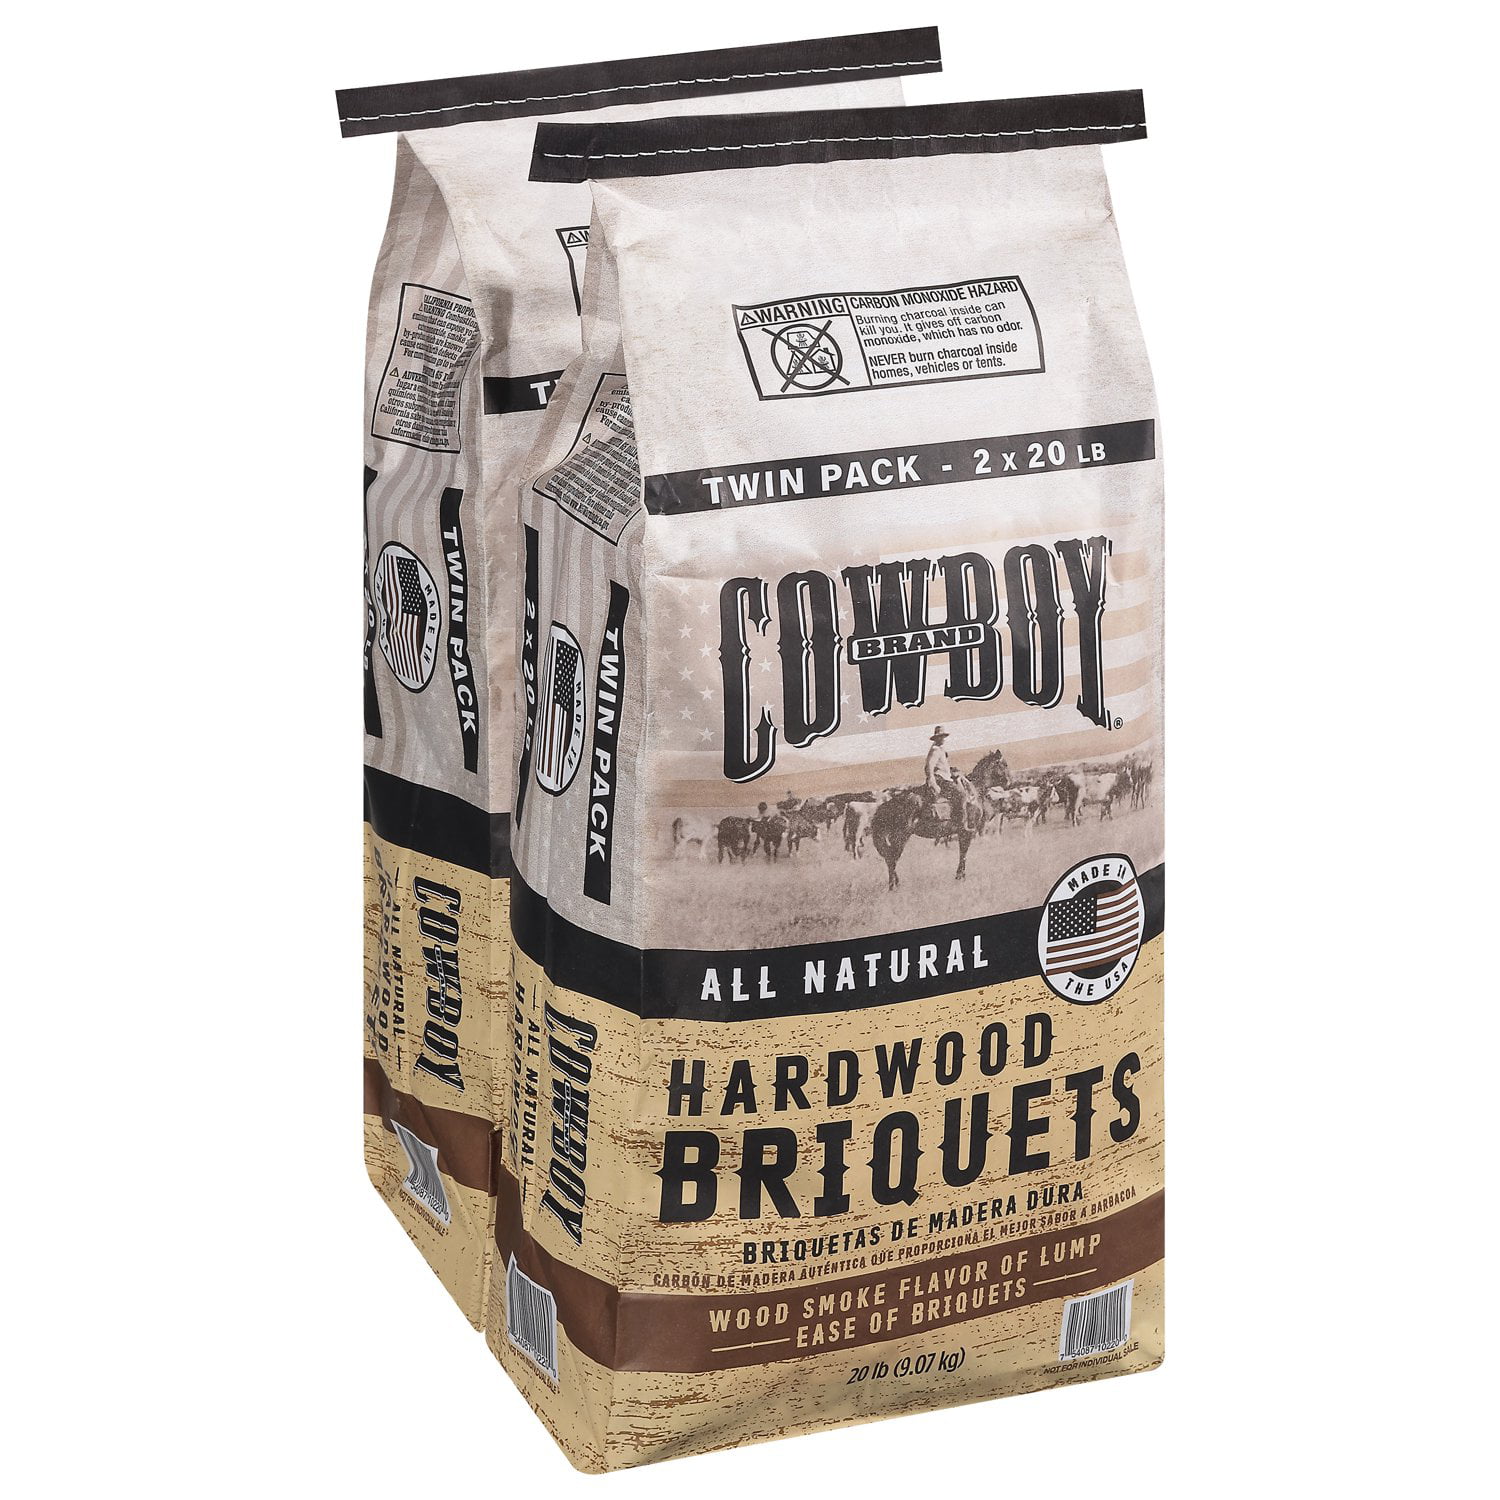 2-Pack 20-Lb Cowboy Hardwood Charcoal Briquets $17.90 + Free shipping w/ Walmart+ or on orders $35+